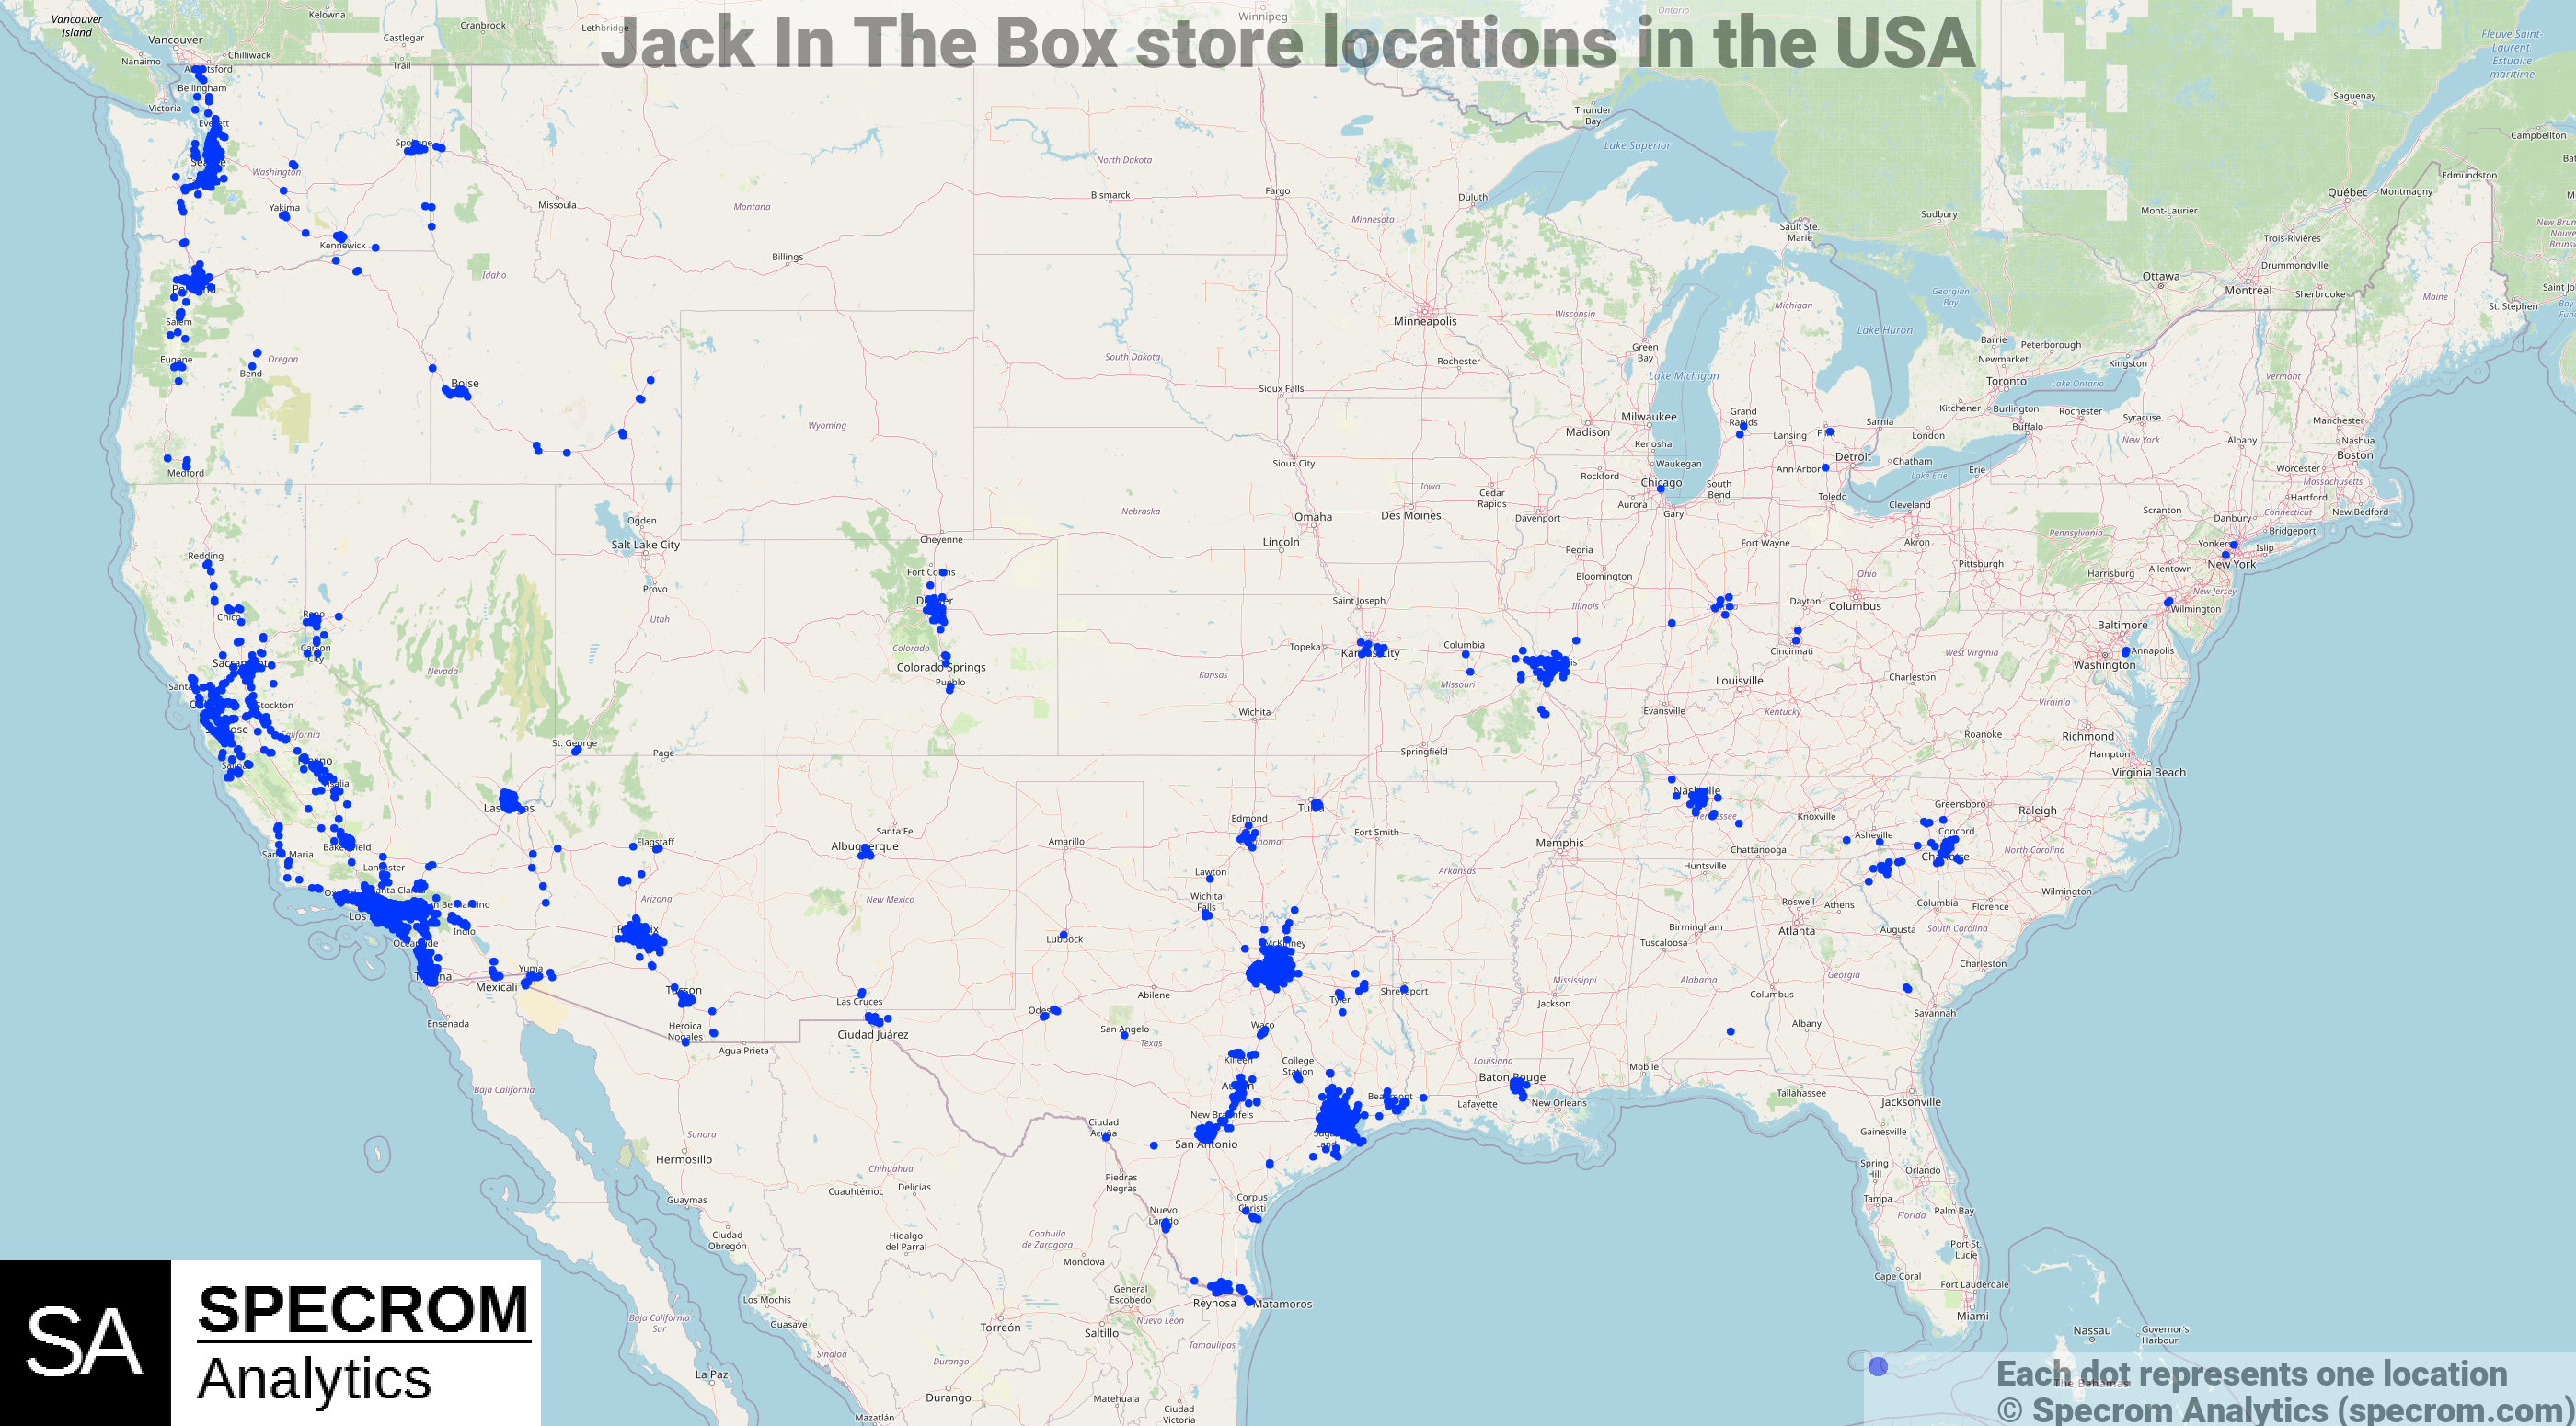 Jack In The Box store locations in the USA